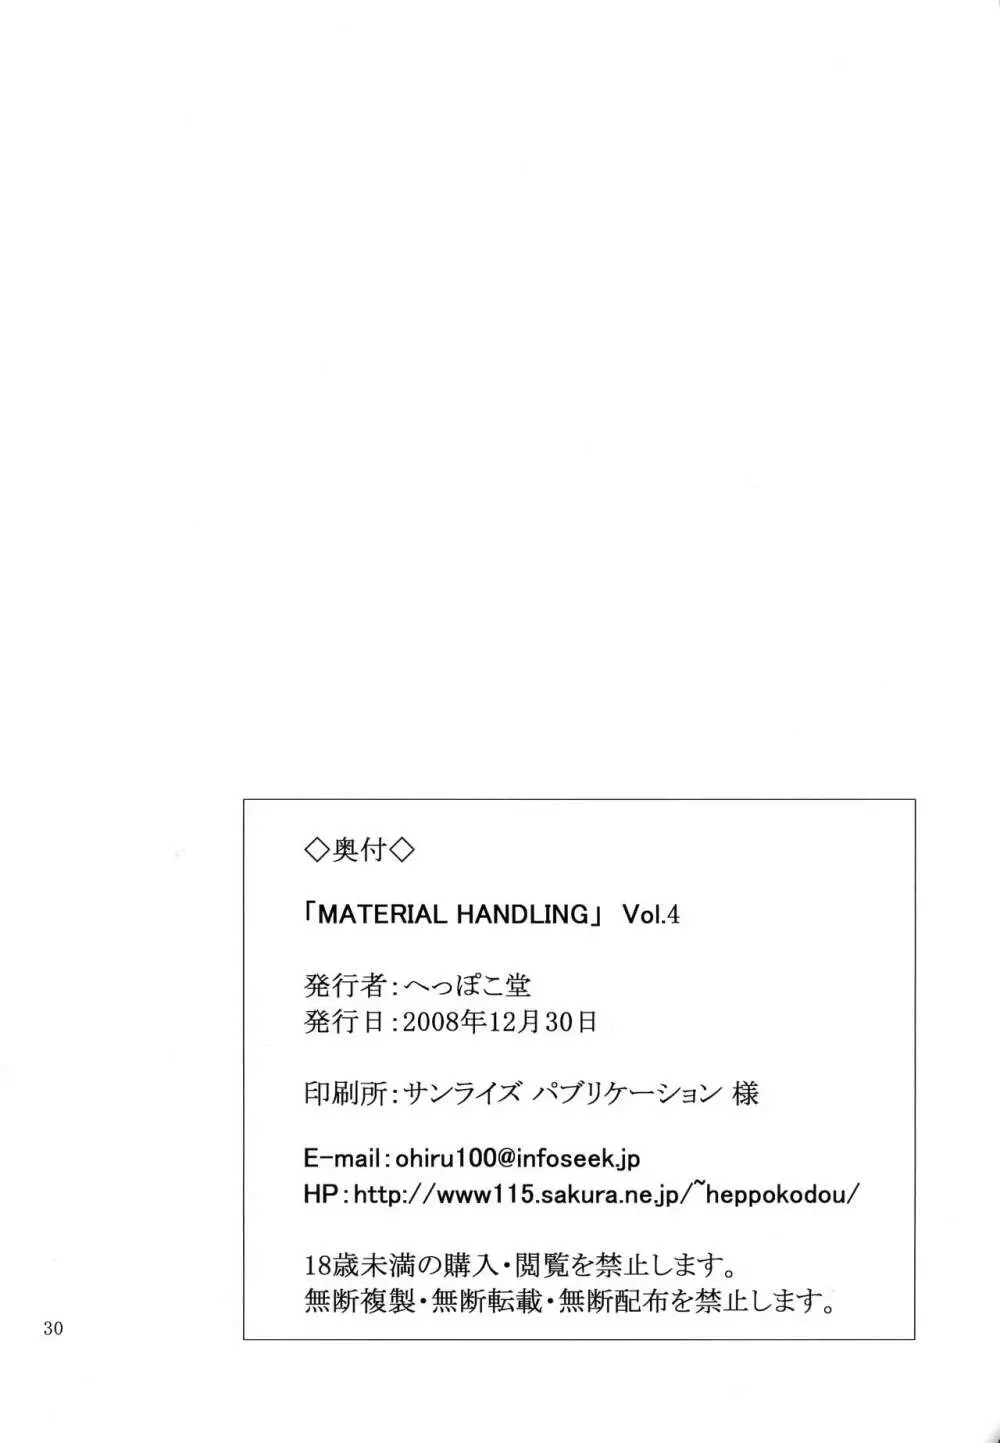 Material Handling Vol.4 Page.30